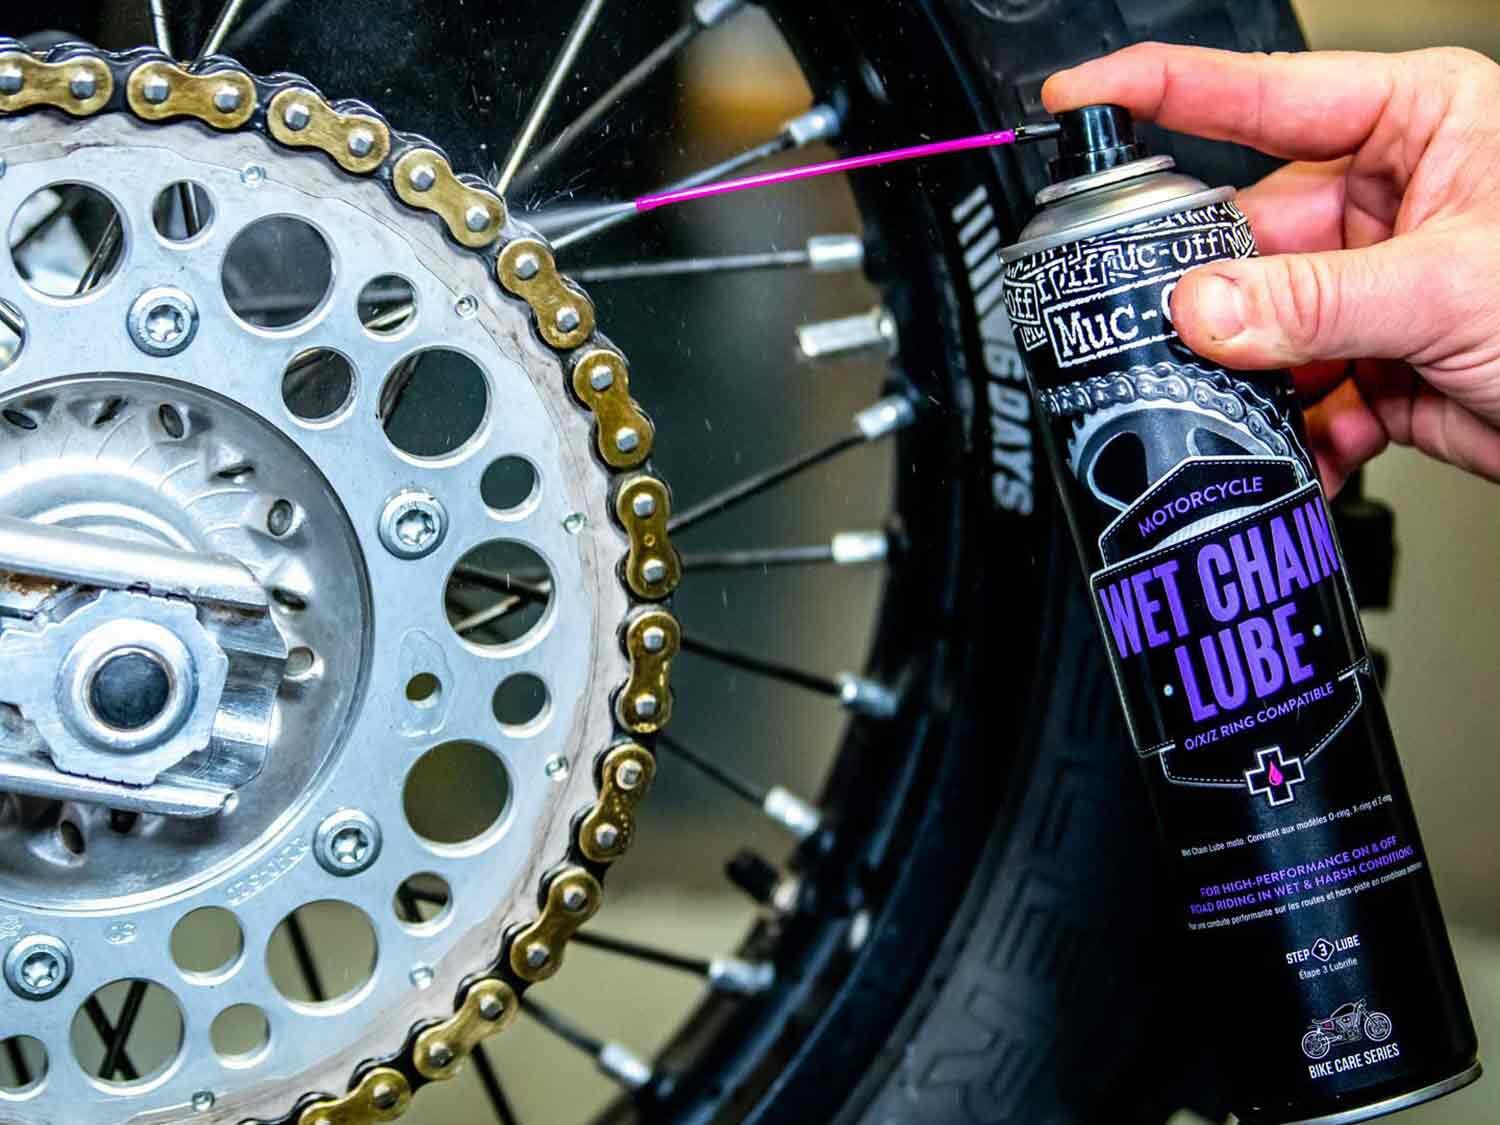 Don’t forget to lube the chain before you put your bike away.